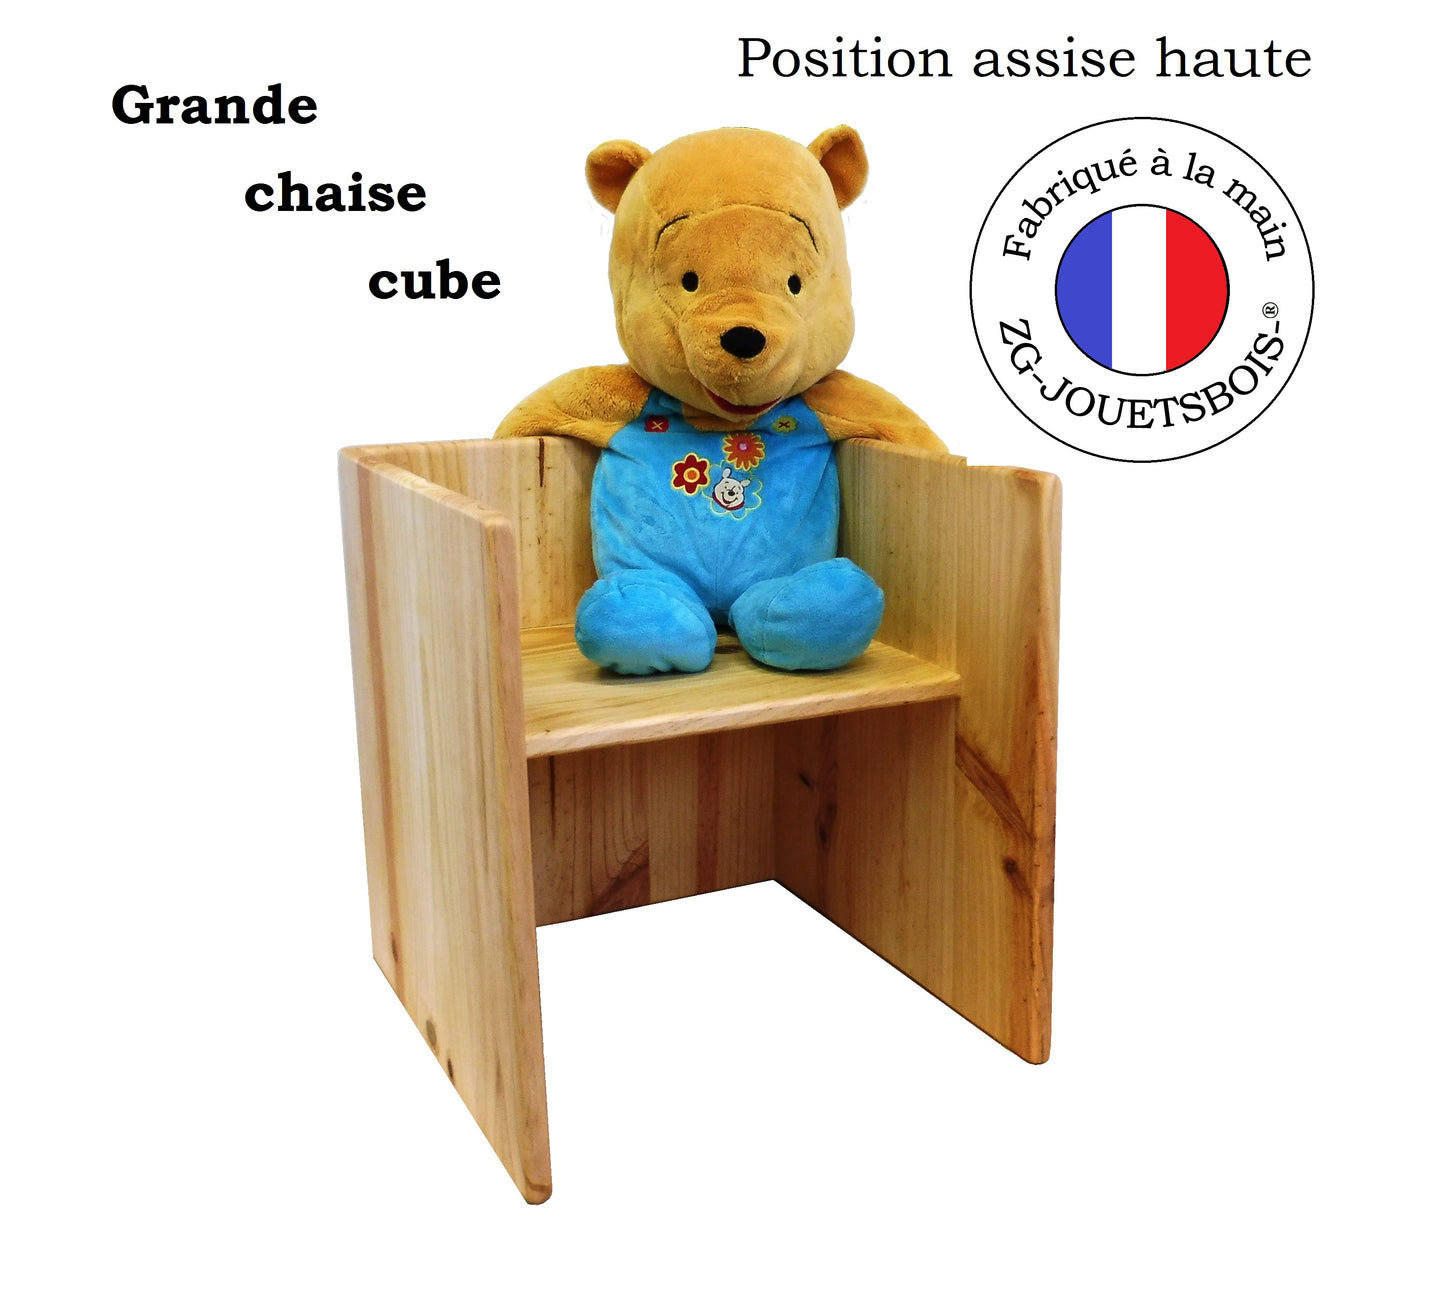 Montessori cube table or Large cube chair